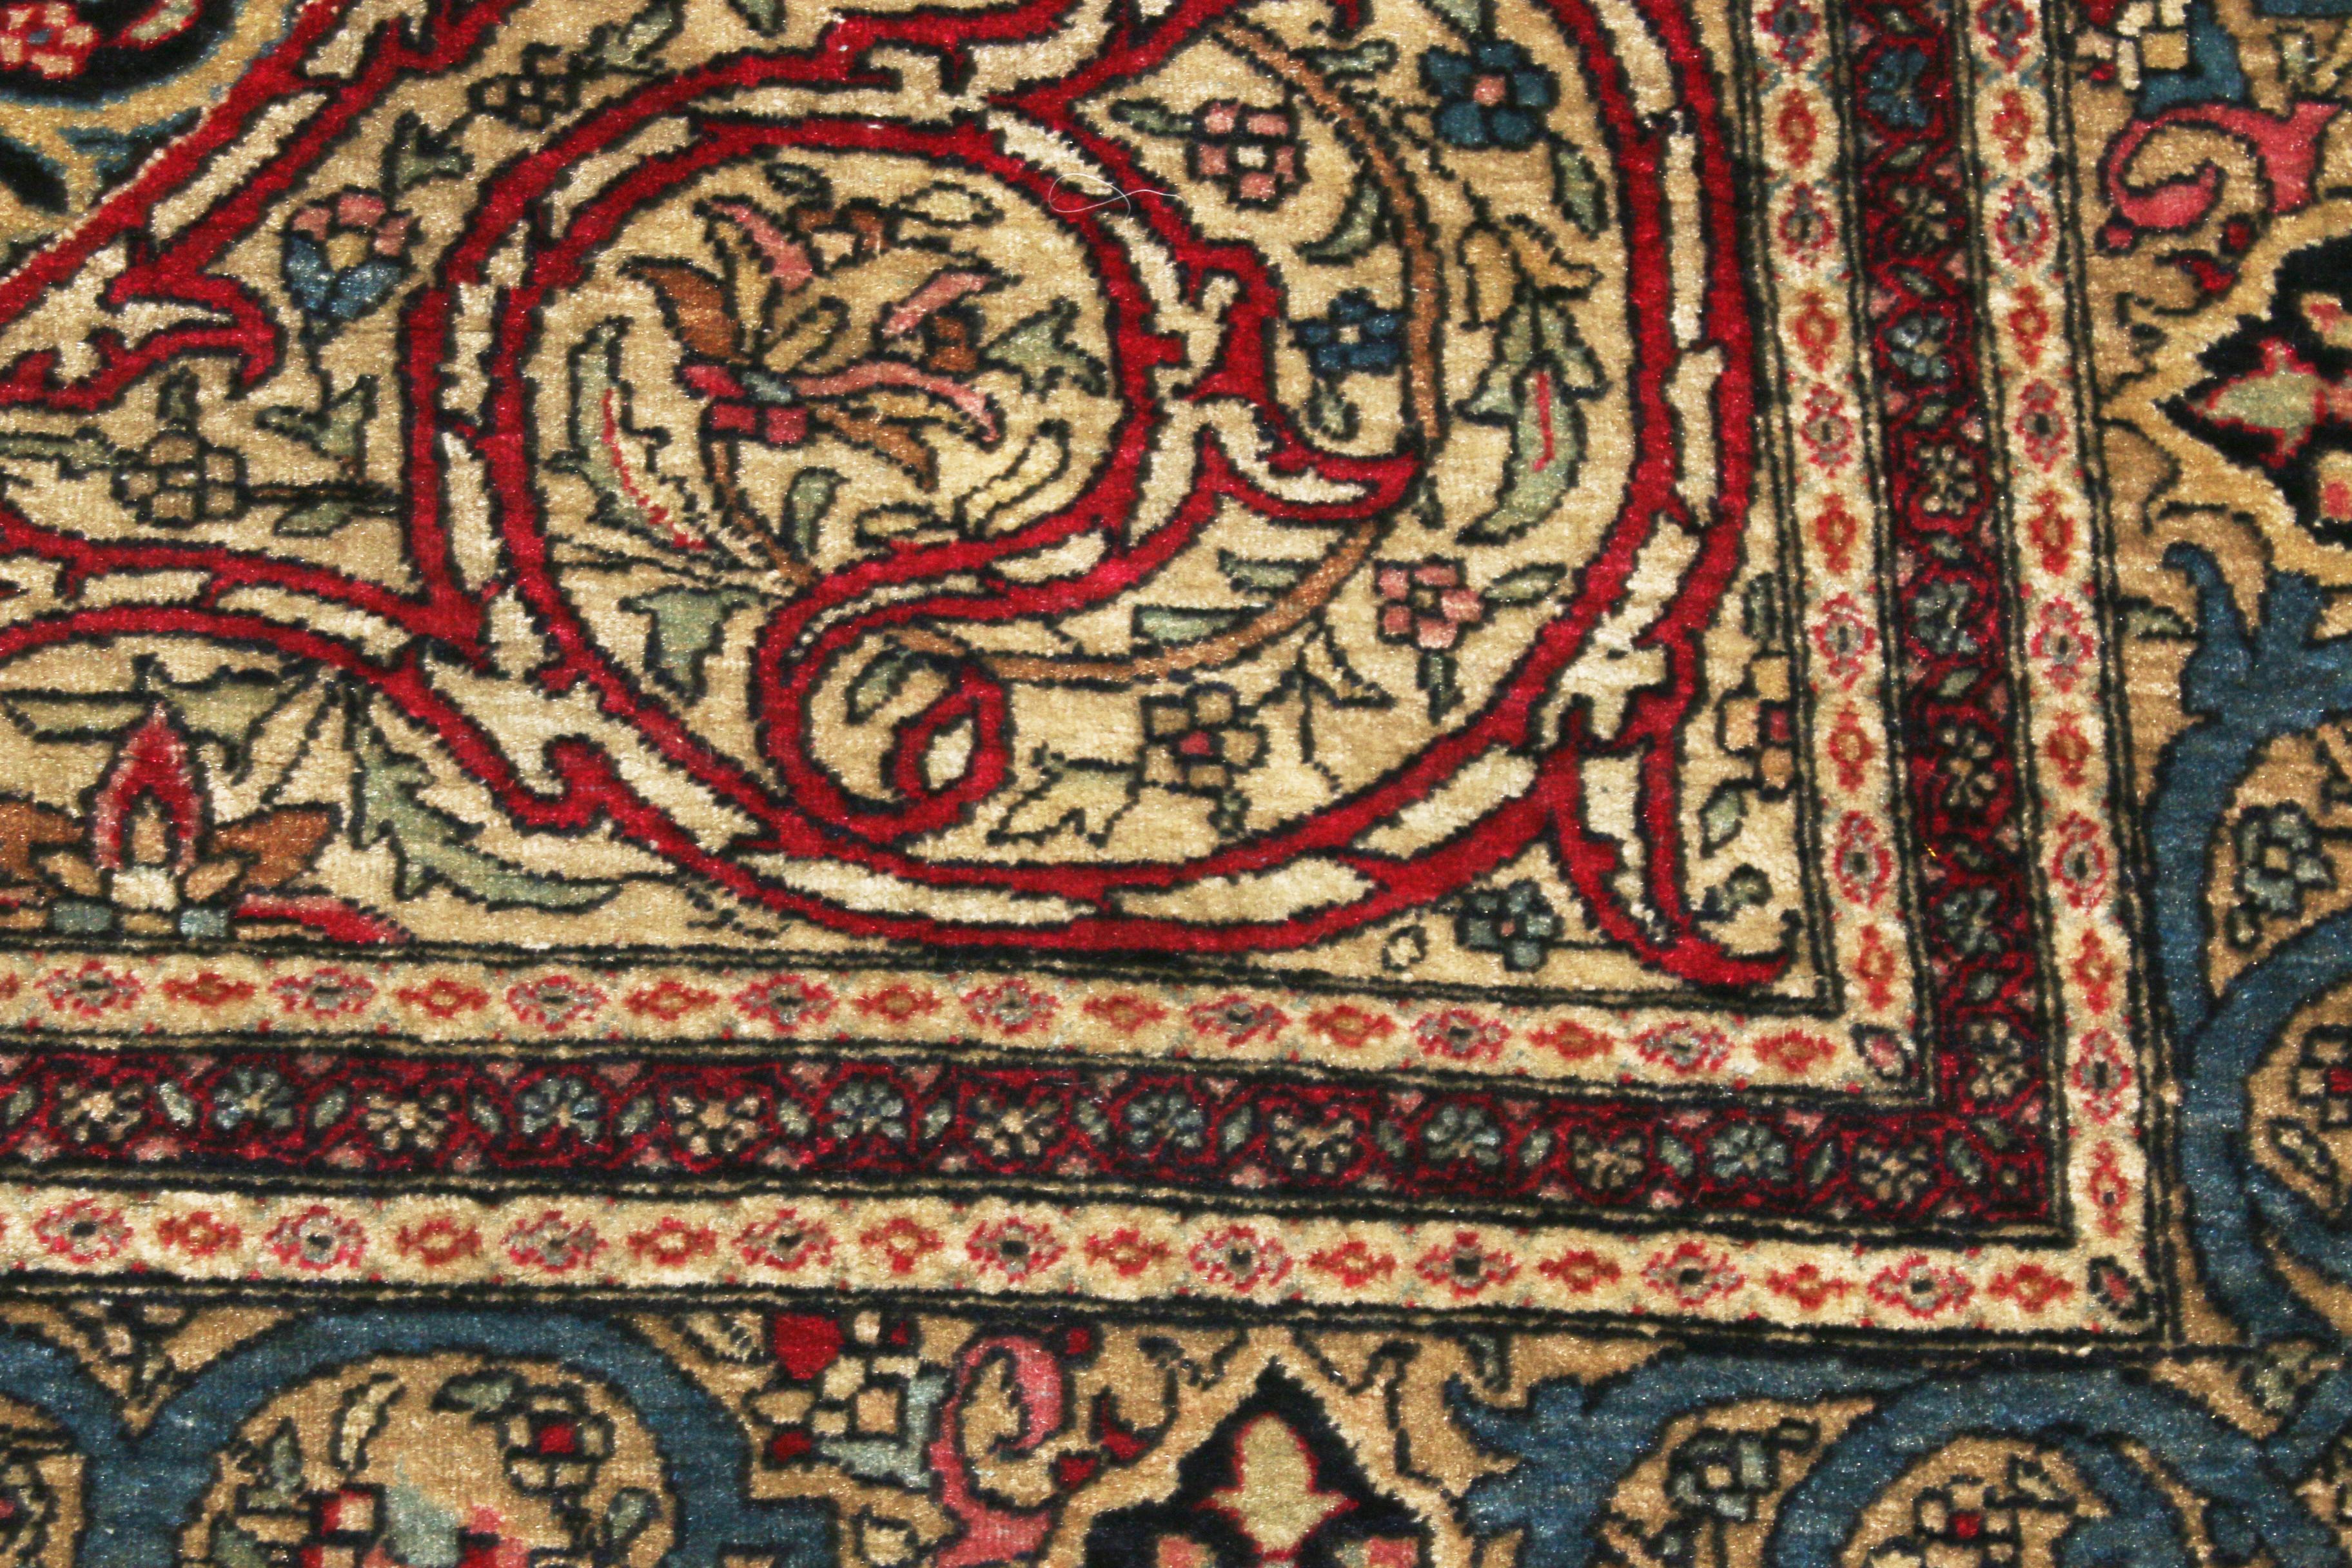 Late 19th Century Antique Isfahan Red and Golden Beige Wool Persian Rug Floral Pattern